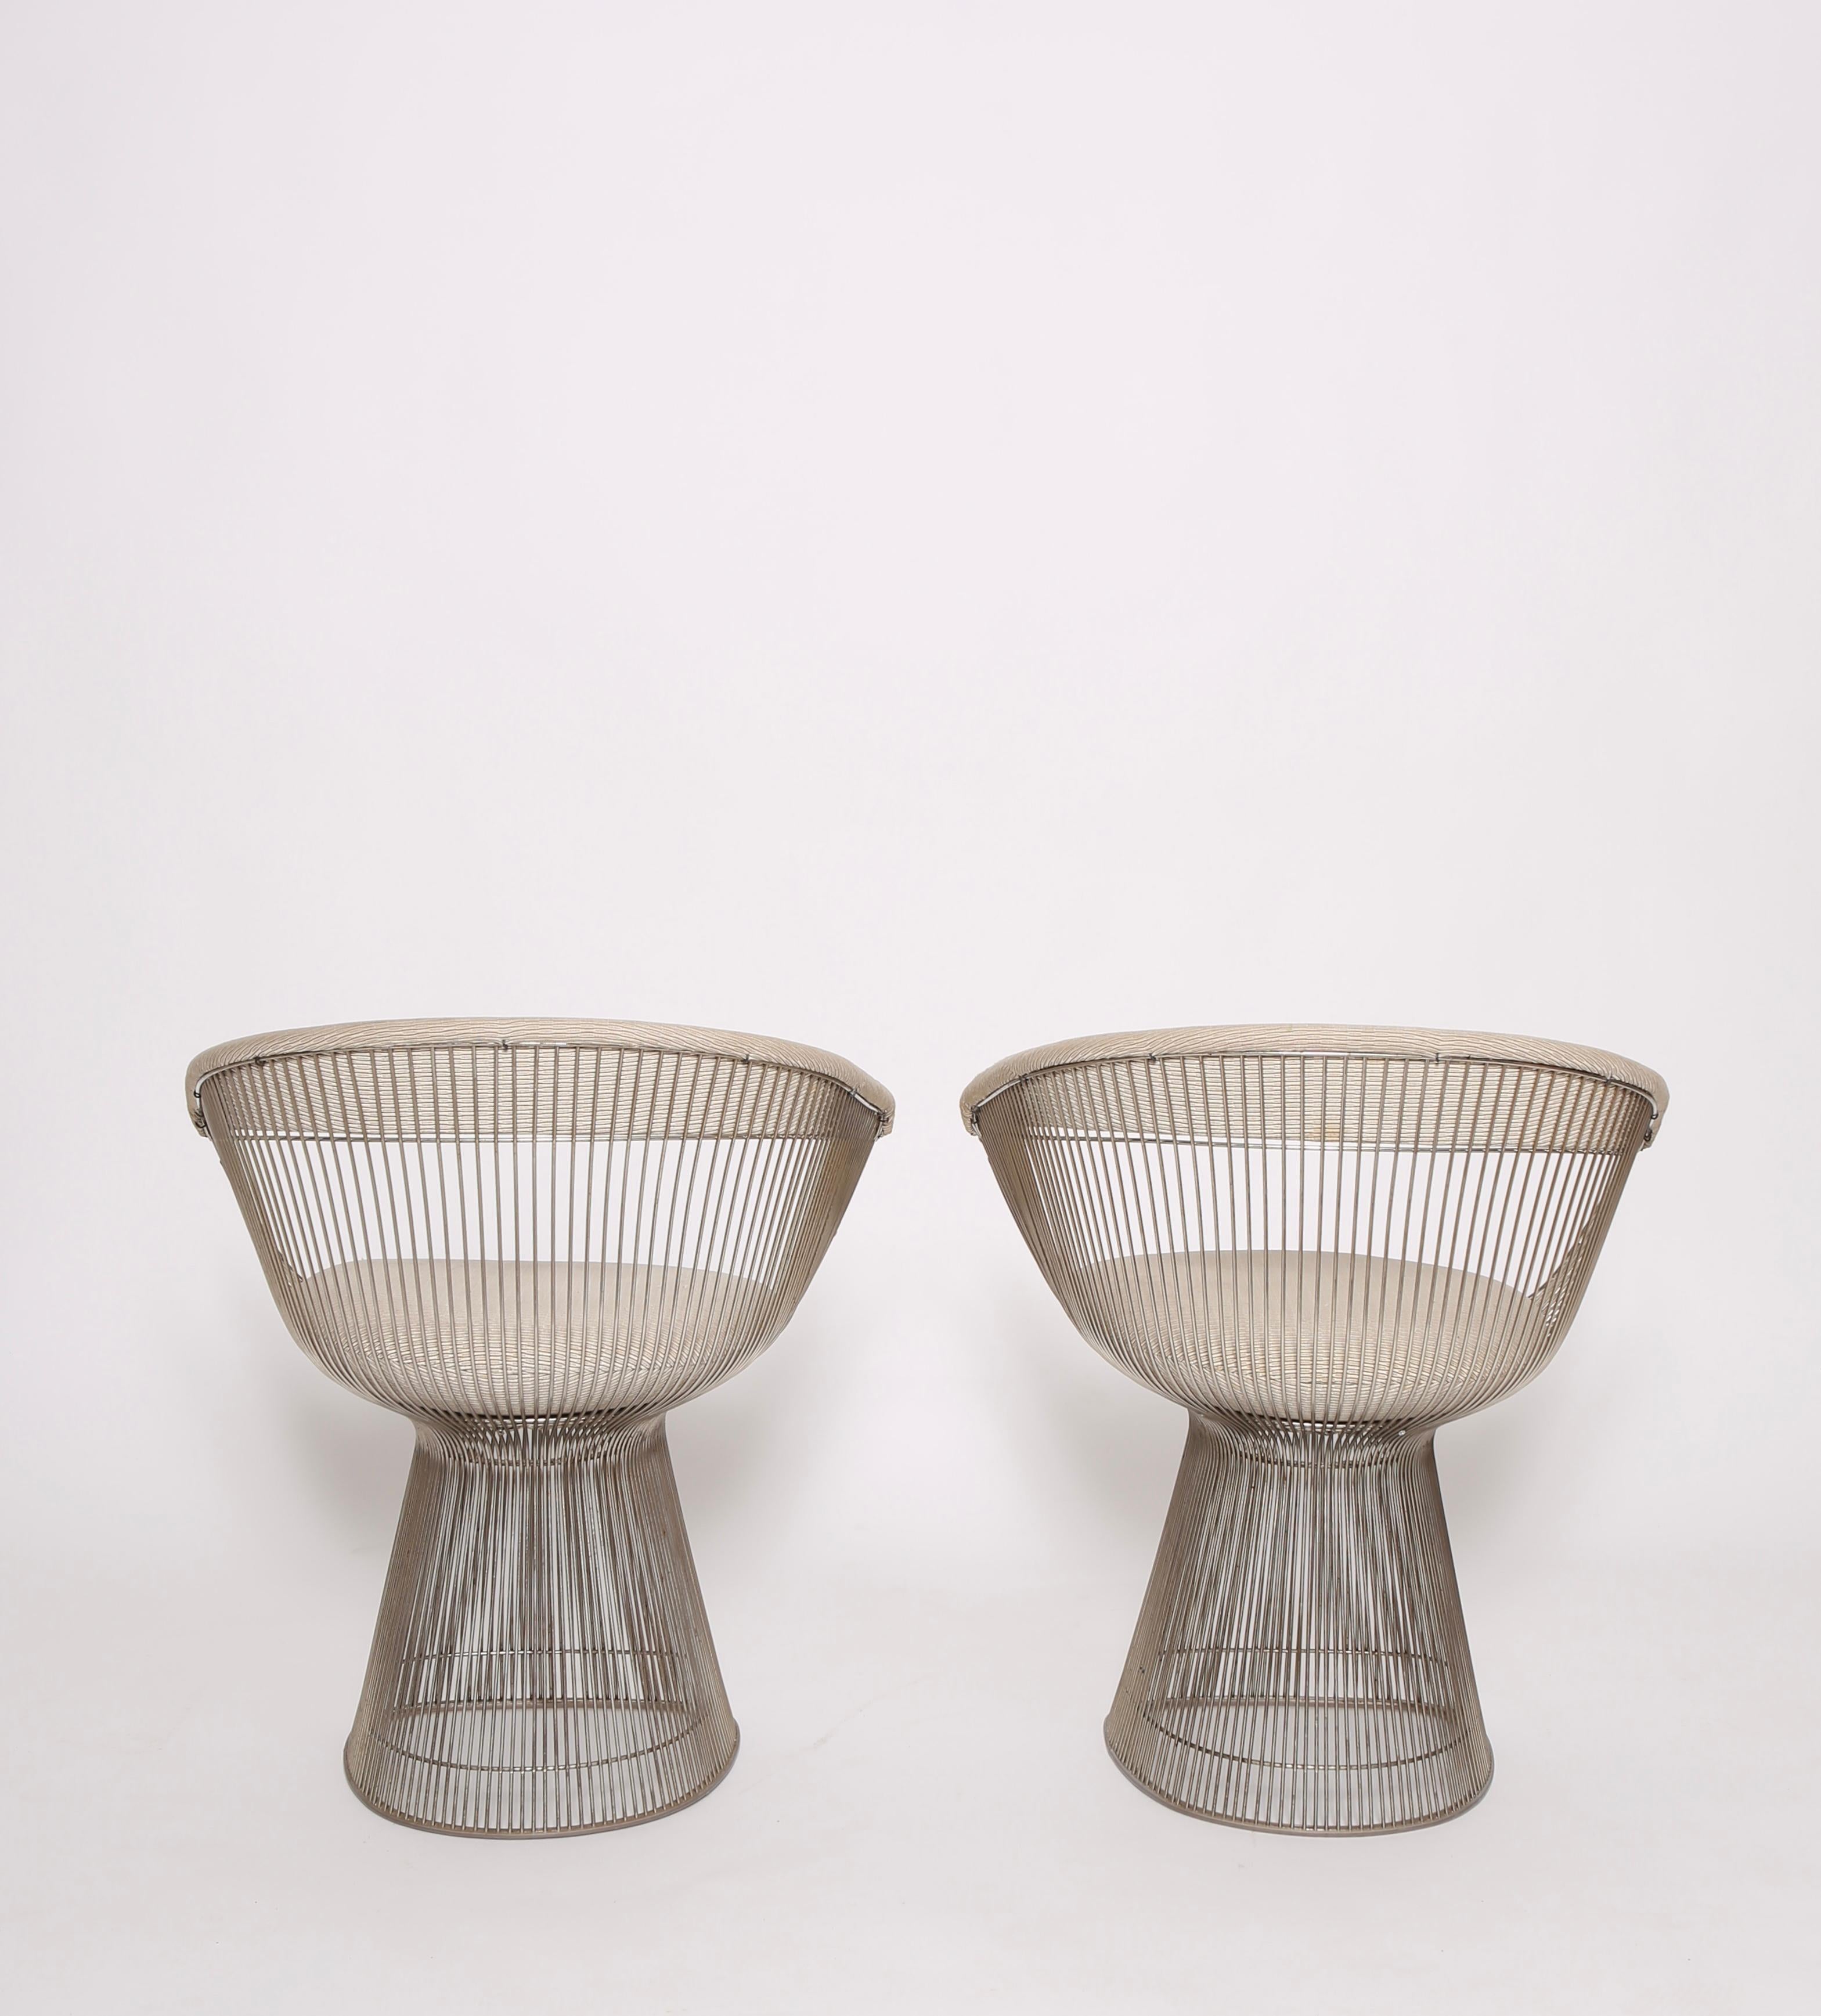 Nice vintage pair of nickel finish dining chairs by Warren Platner for Knoll circa 1960s. Upholstery was updated in the 1990s but shows signs of use and it is recommended that these be reupholstered upon purchasing. 
Frames are in good condition